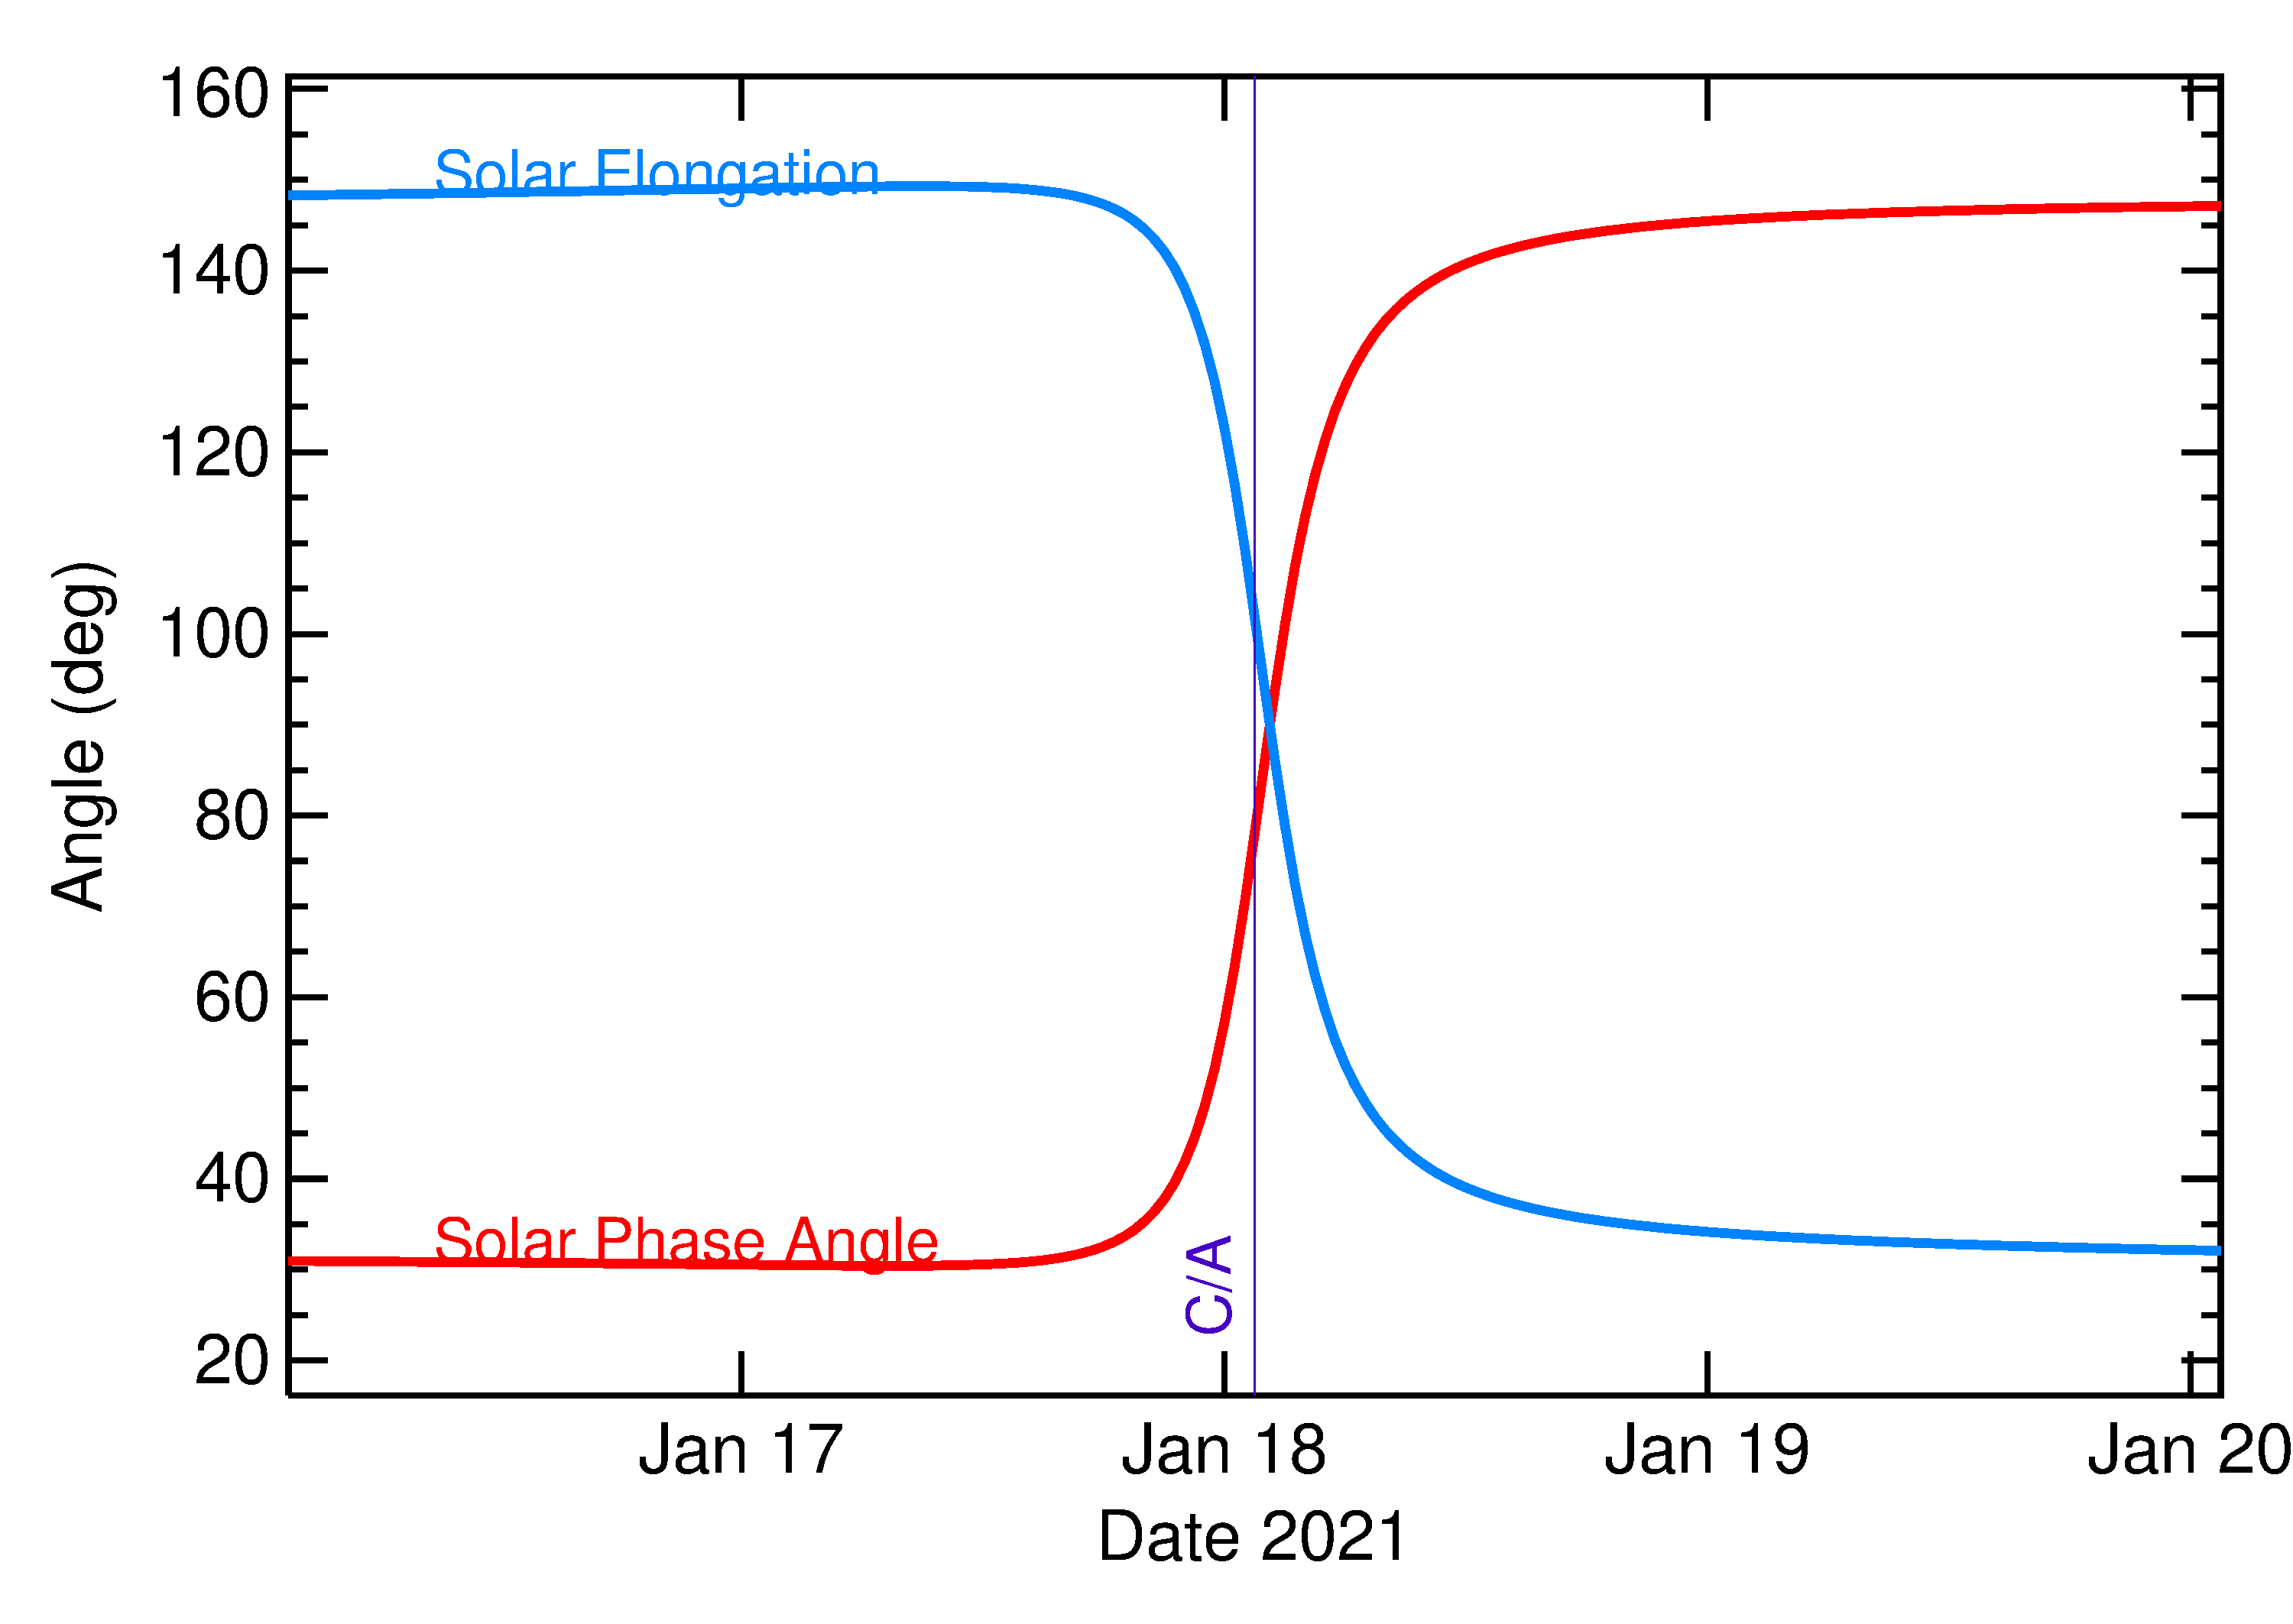 Solar Elongation and Solar Phase Angle of 2021 BV1 in the days around closest approach